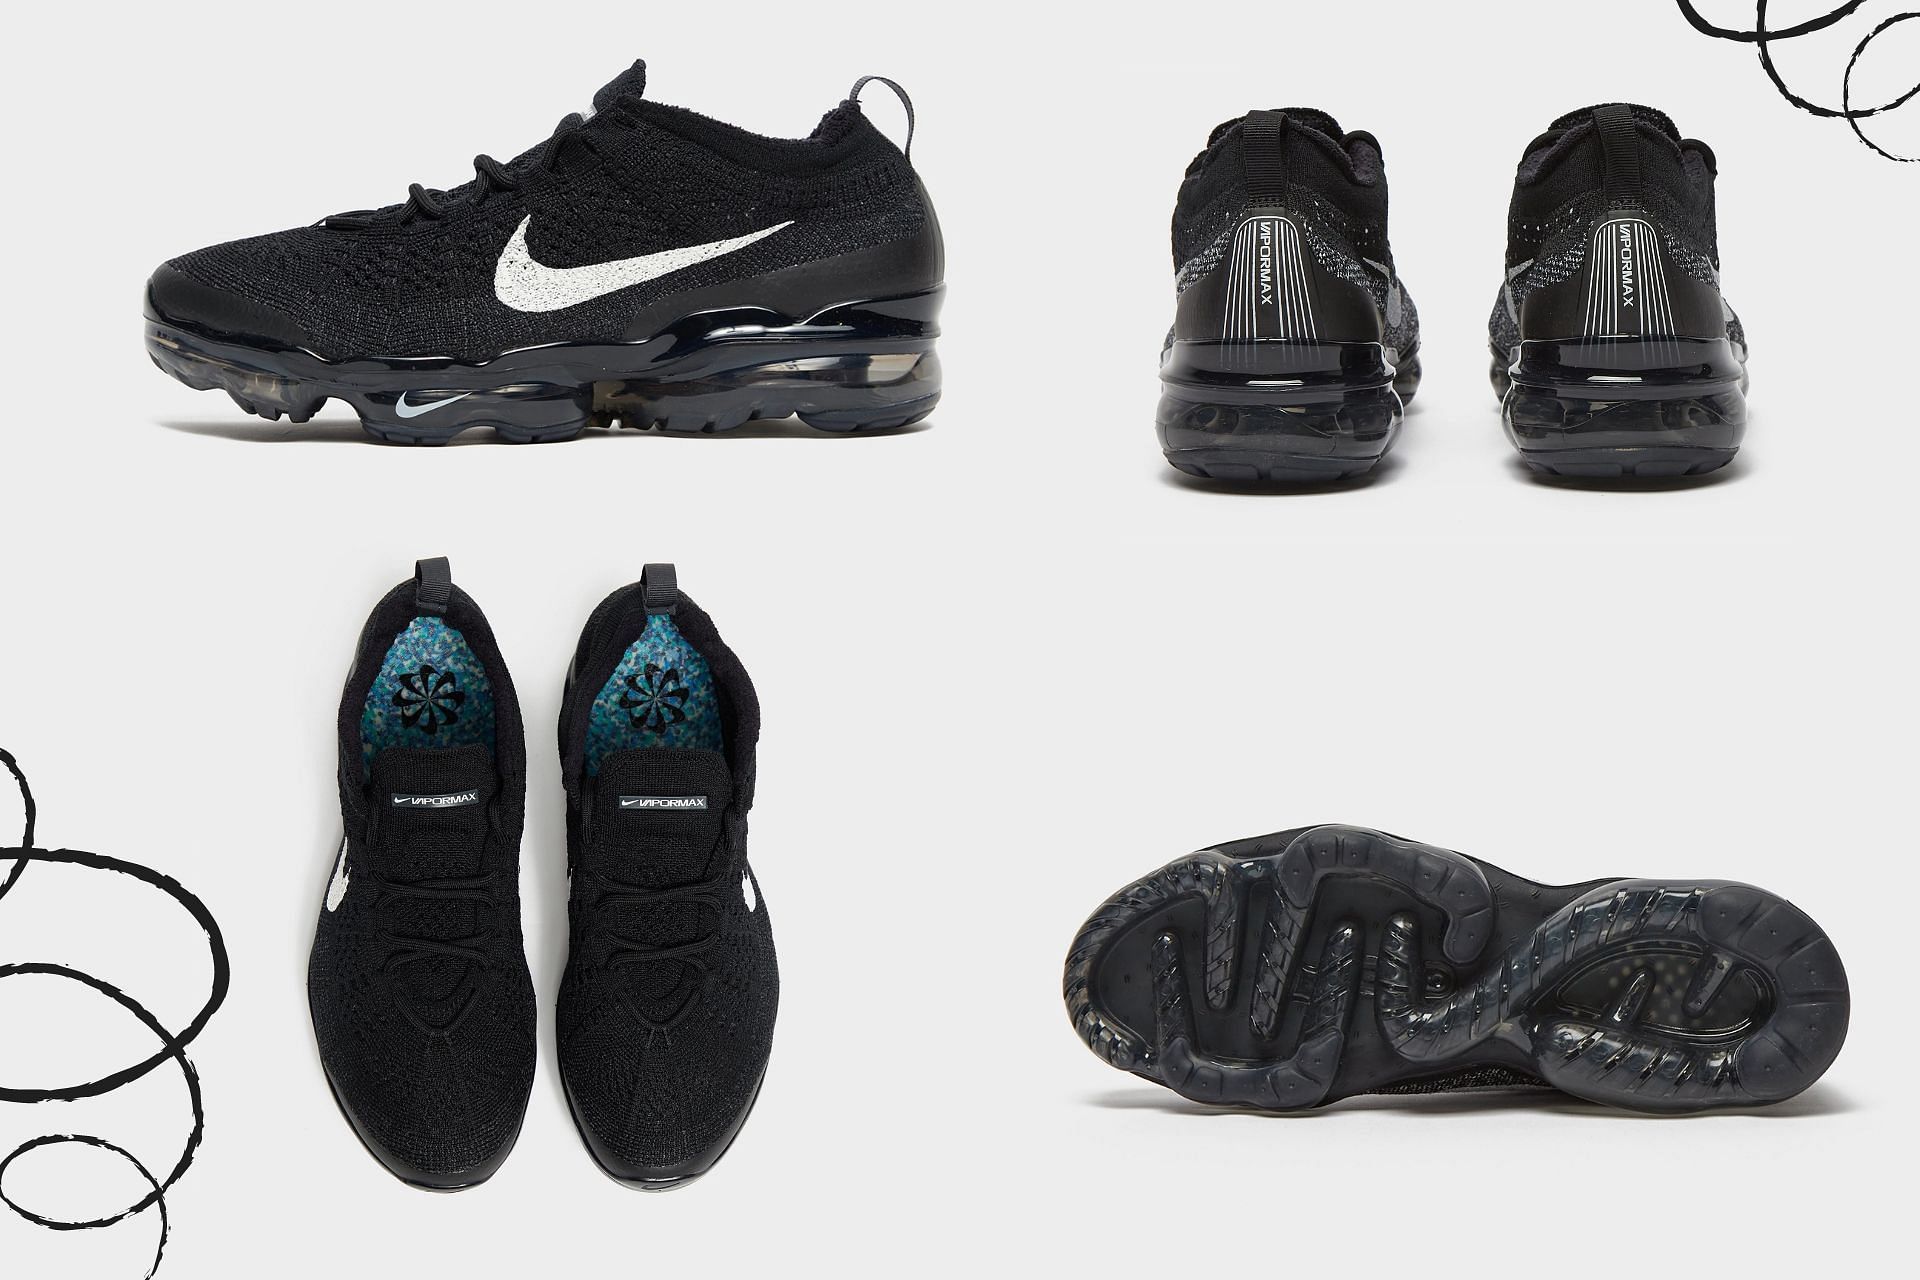 Panadería ansiedad Anotar Nike Vapormax 2023 Flyknit “Black/White” sneakers: Where to buy, release  date, and more explored